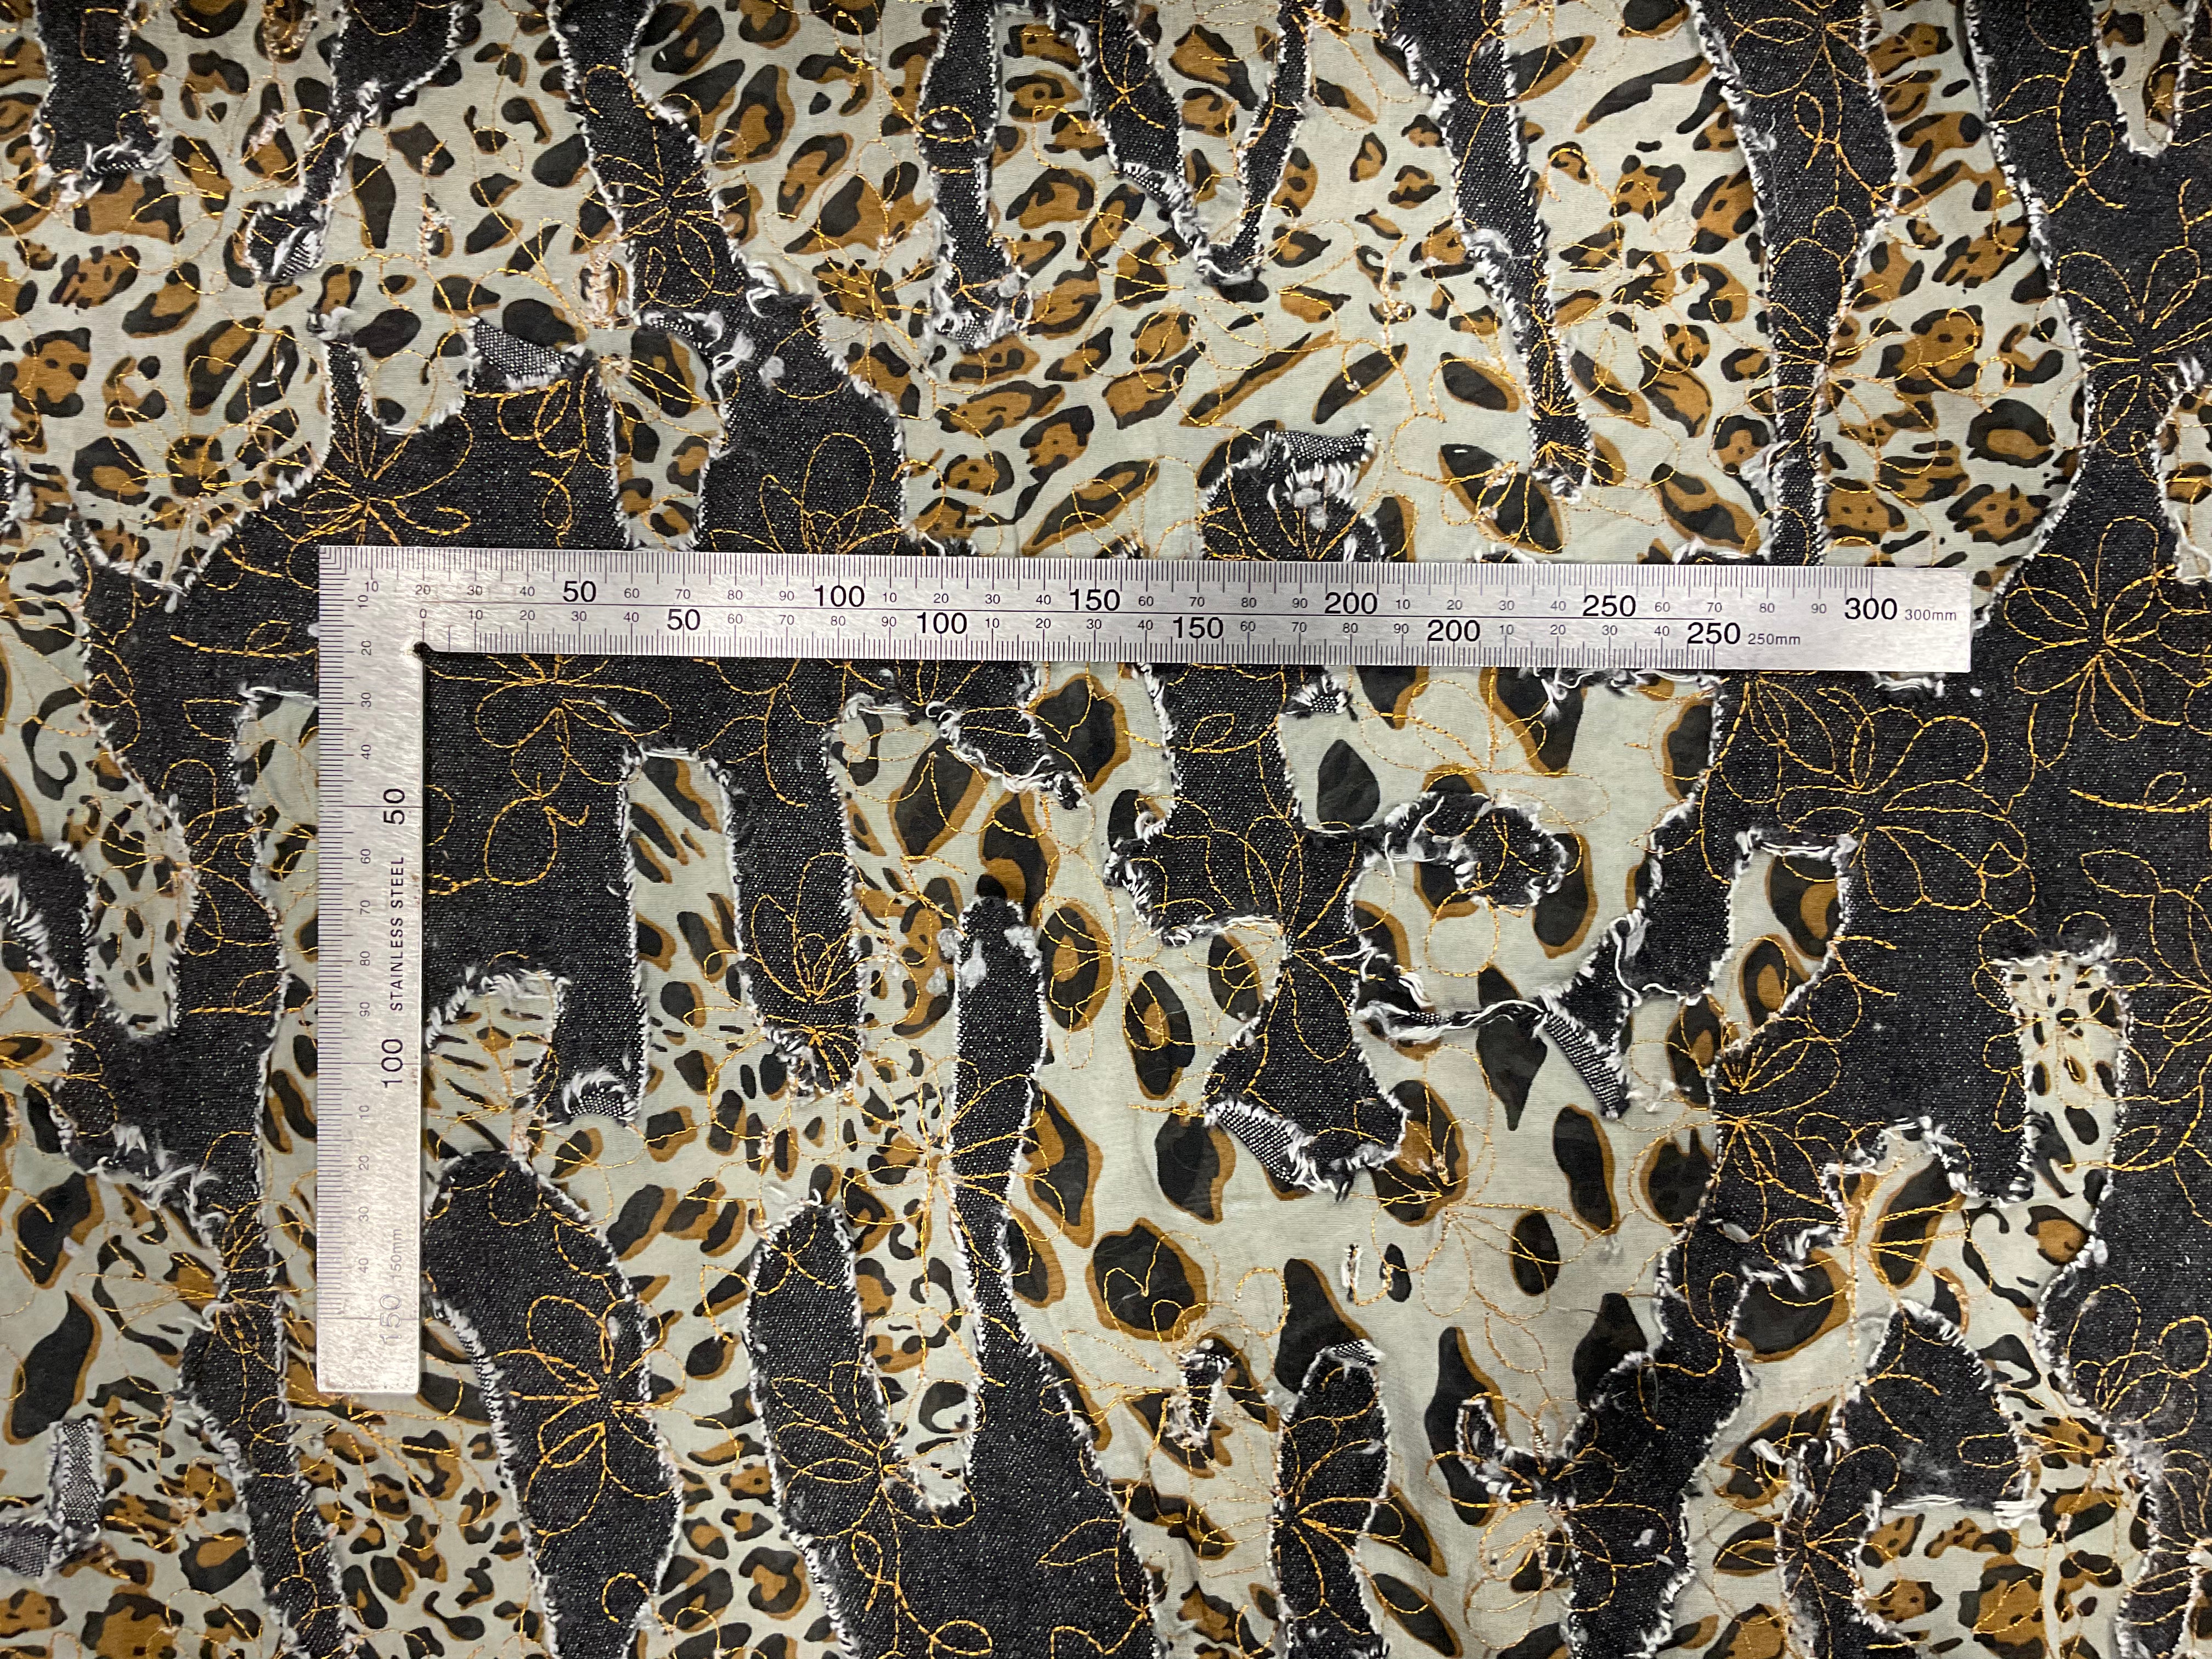 Leopard Print 100% Cotton with Appliquéd Denim and Embroidery